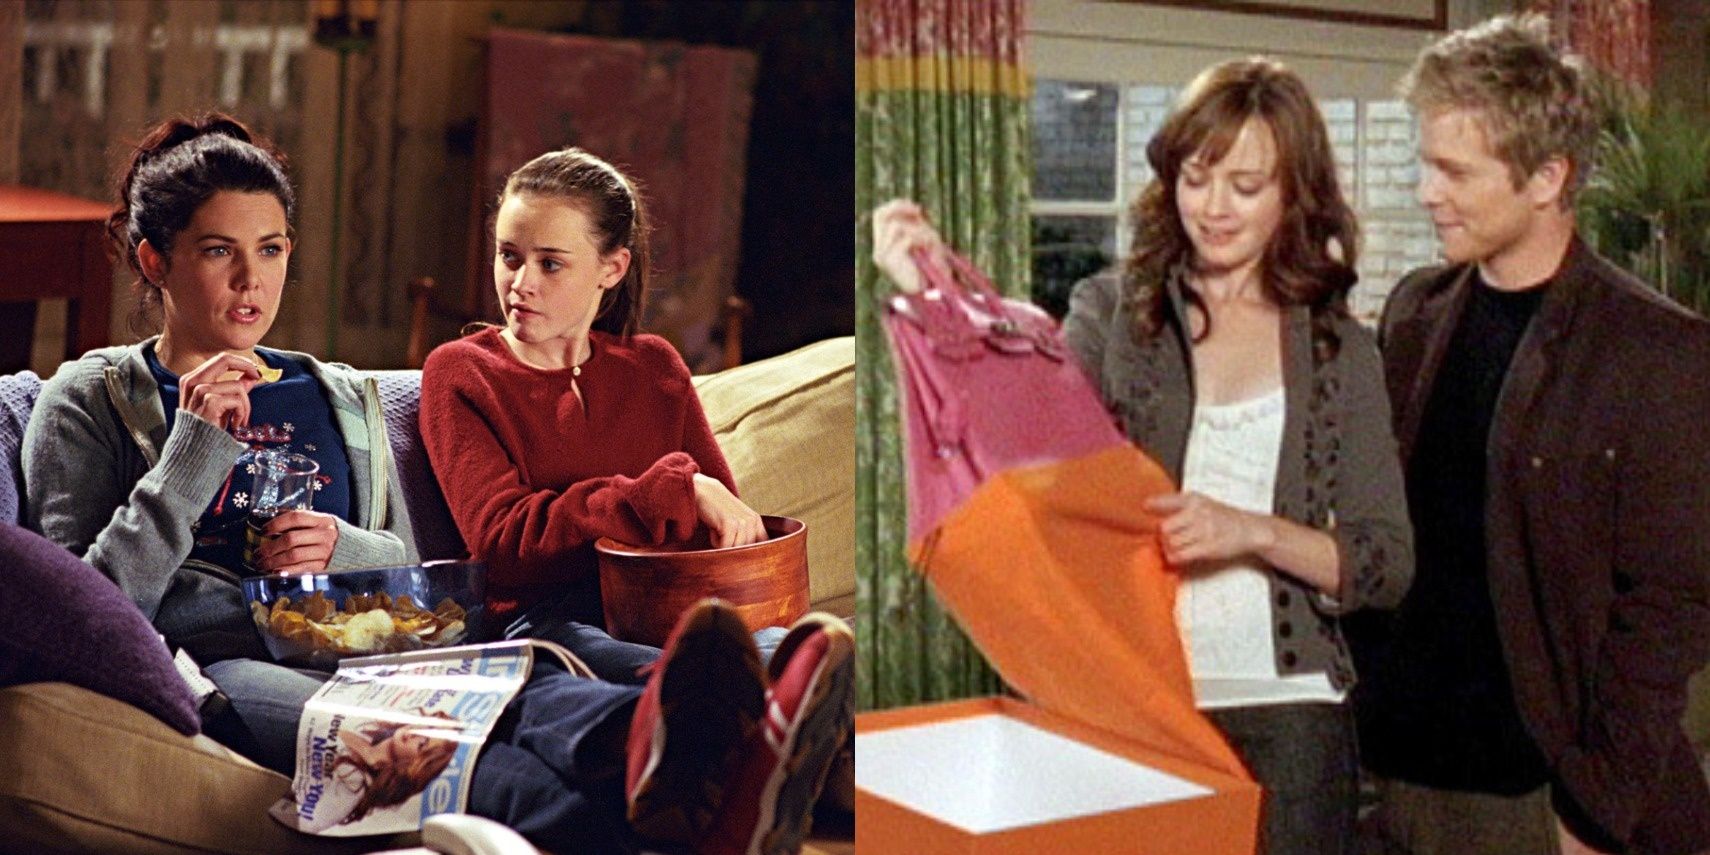 Lorelai and Rory Gilmore at their home; Rory and Logan (Matt Czuchry) looking at a Birkin bag in &quot;Gilmore Girls.&quot;